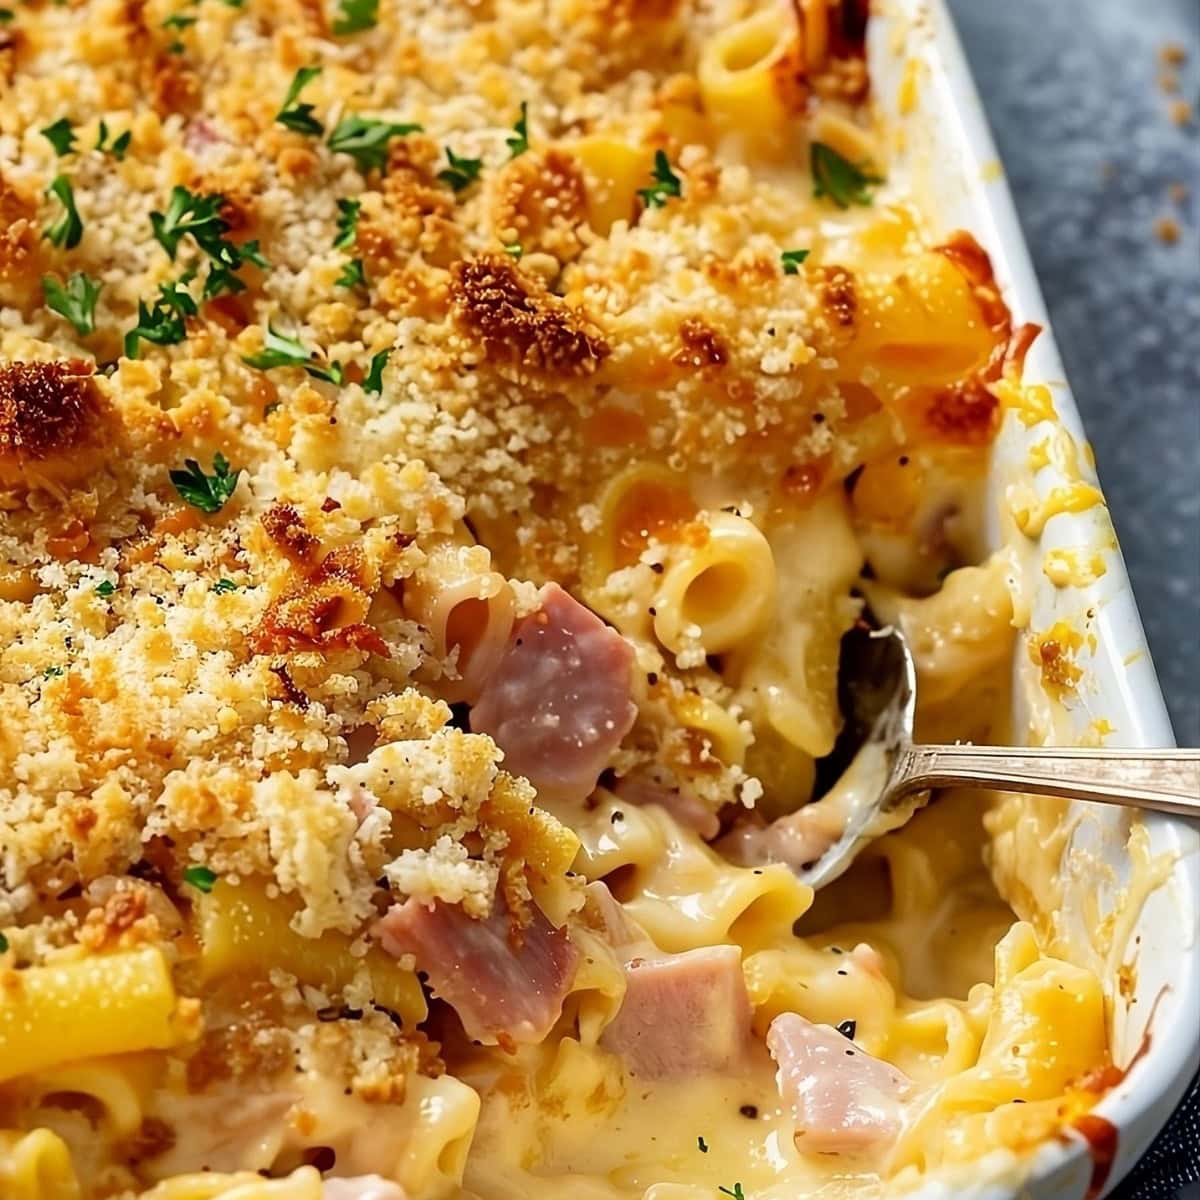 Cheesy ham and noodle bake with spoon in a baking dish.